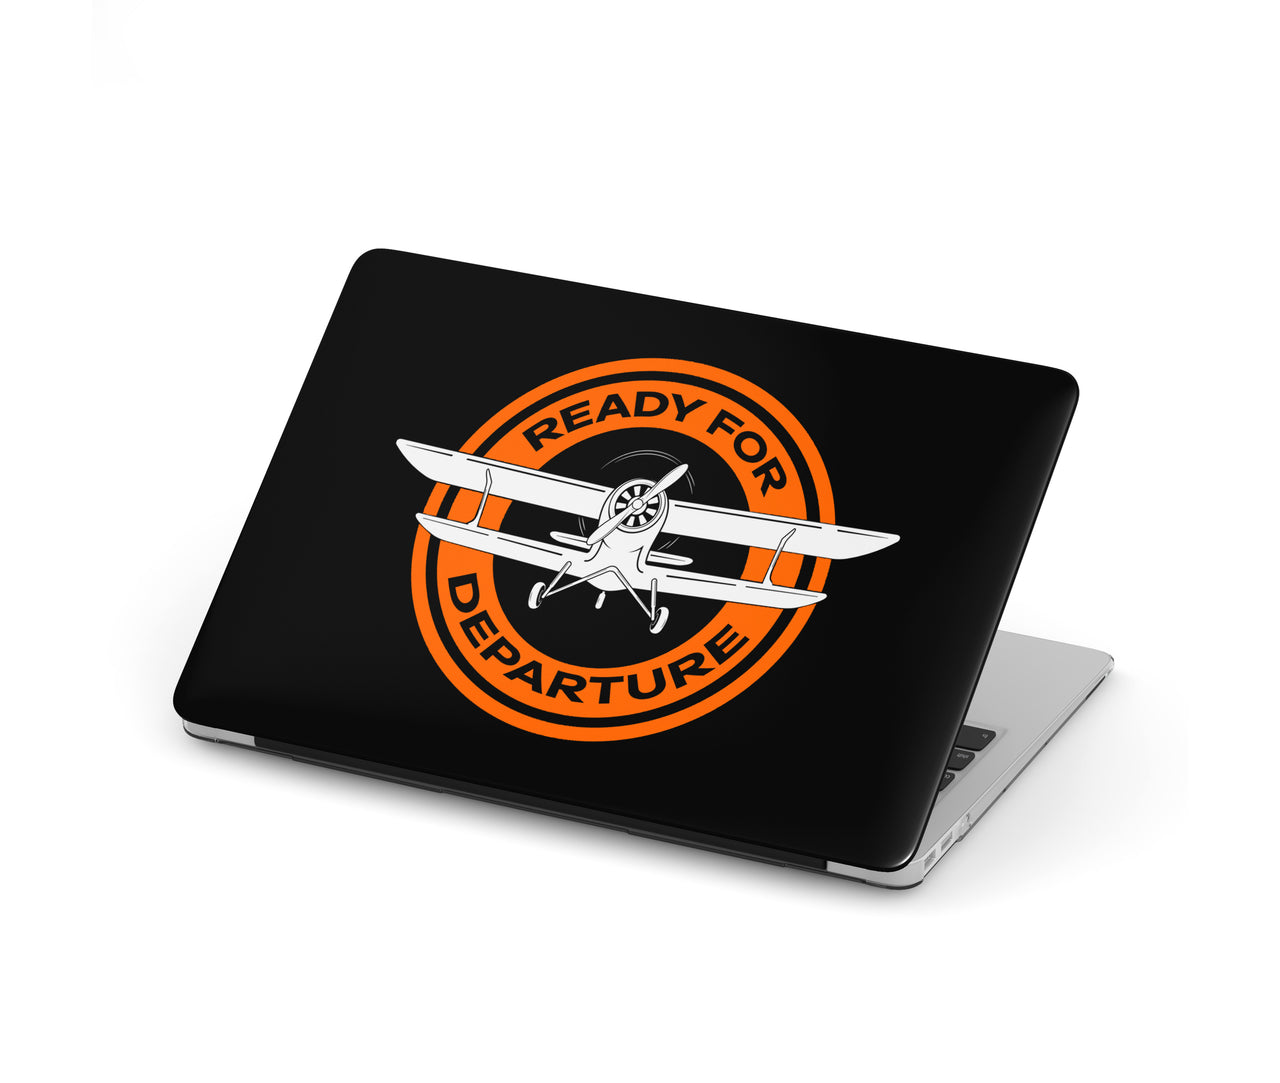 Ready for Departure Designed Macbook Cases